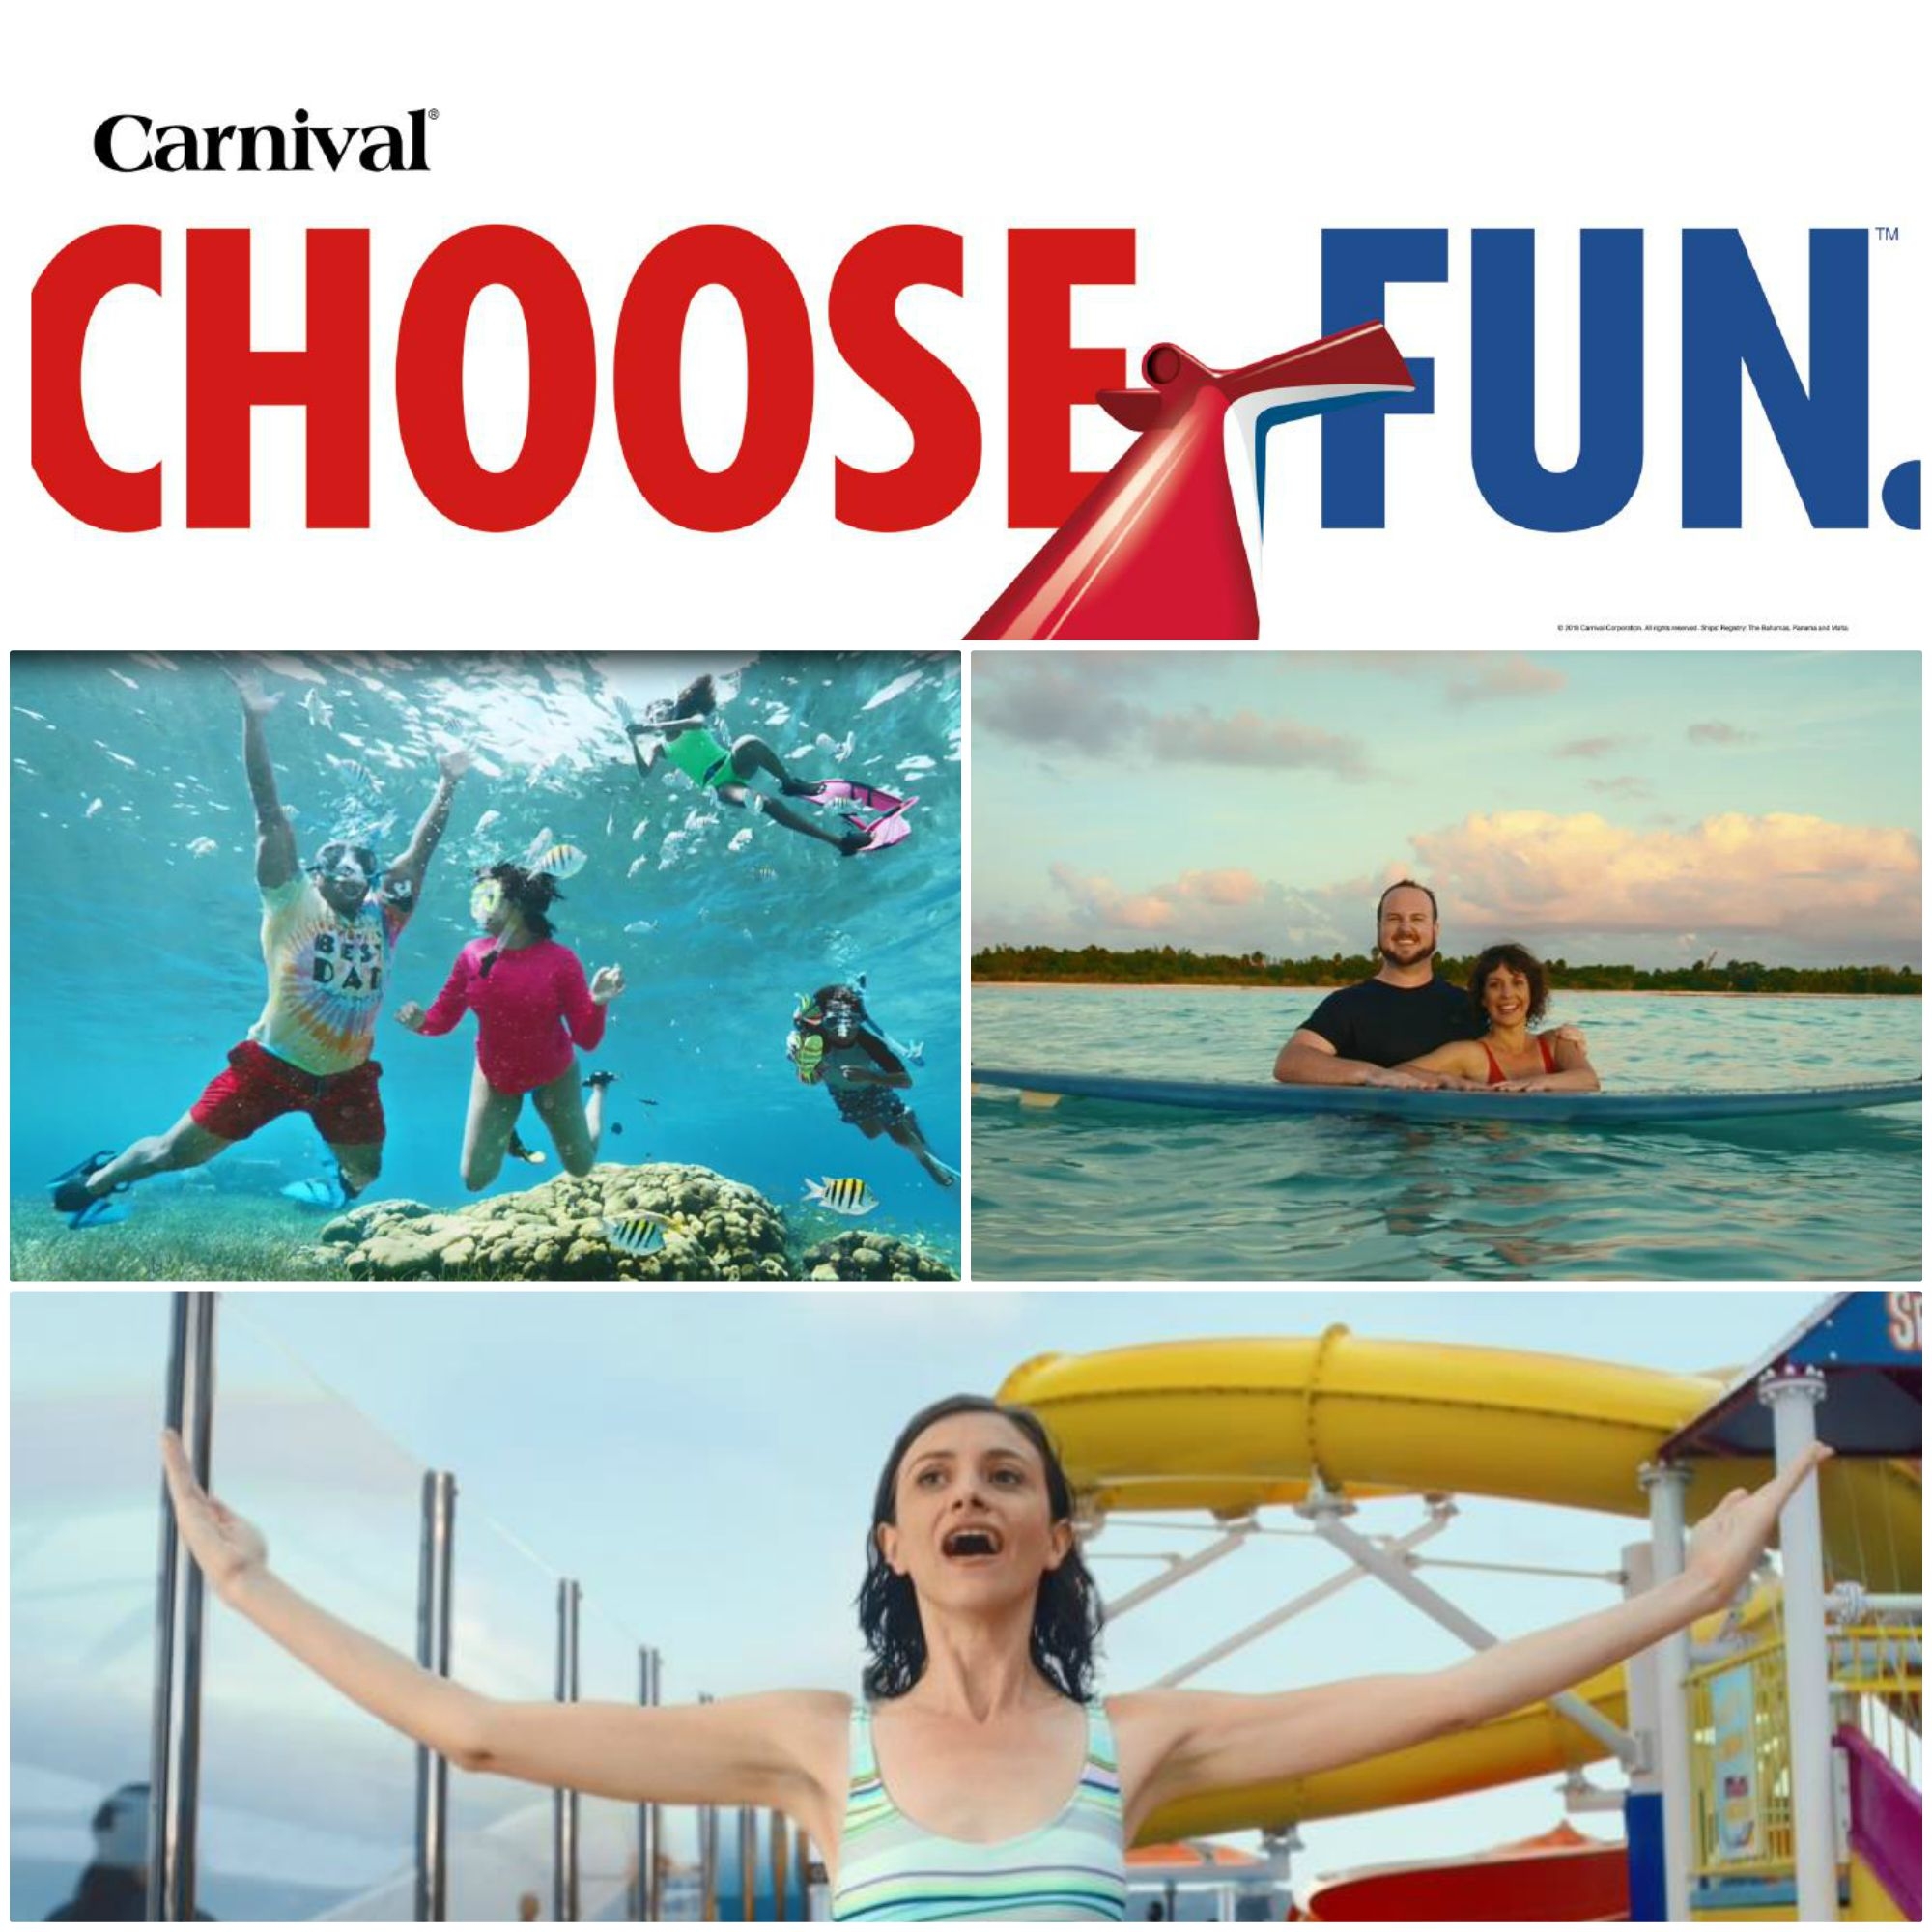 carnival cruise ad song